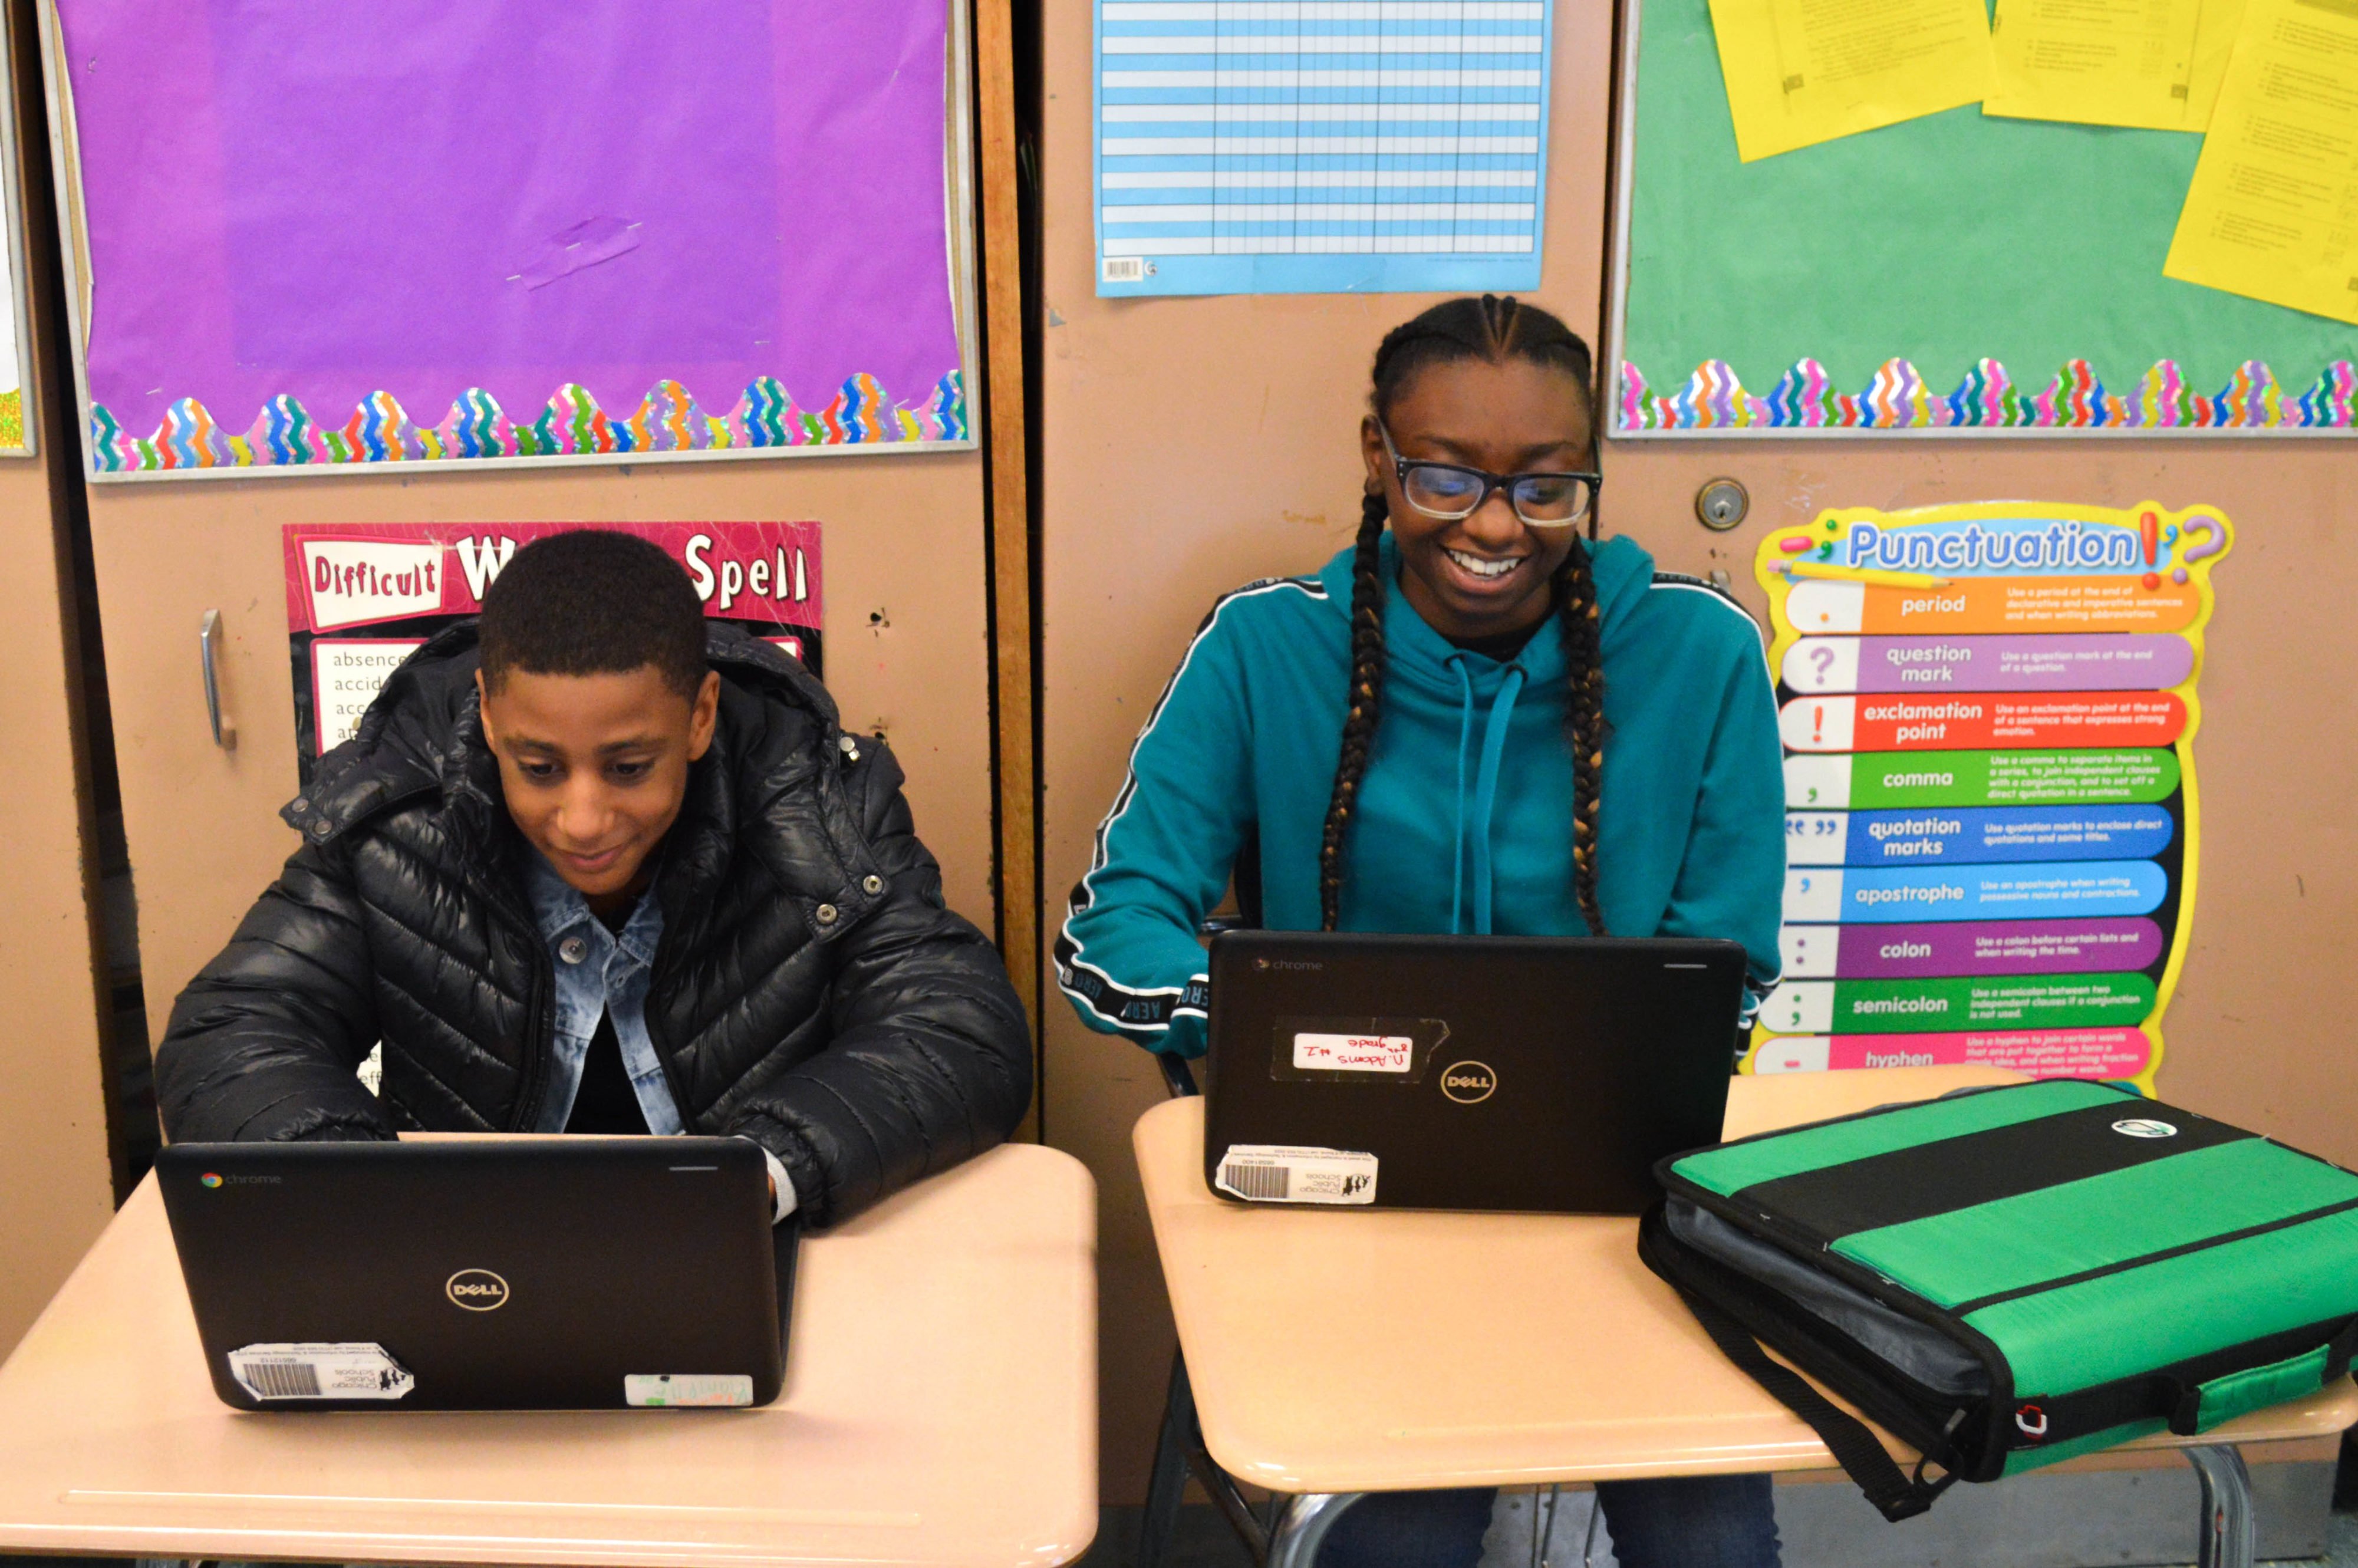 Classmates Malik T. (Left) and Nasjé A. (Right) Work on Research Papers